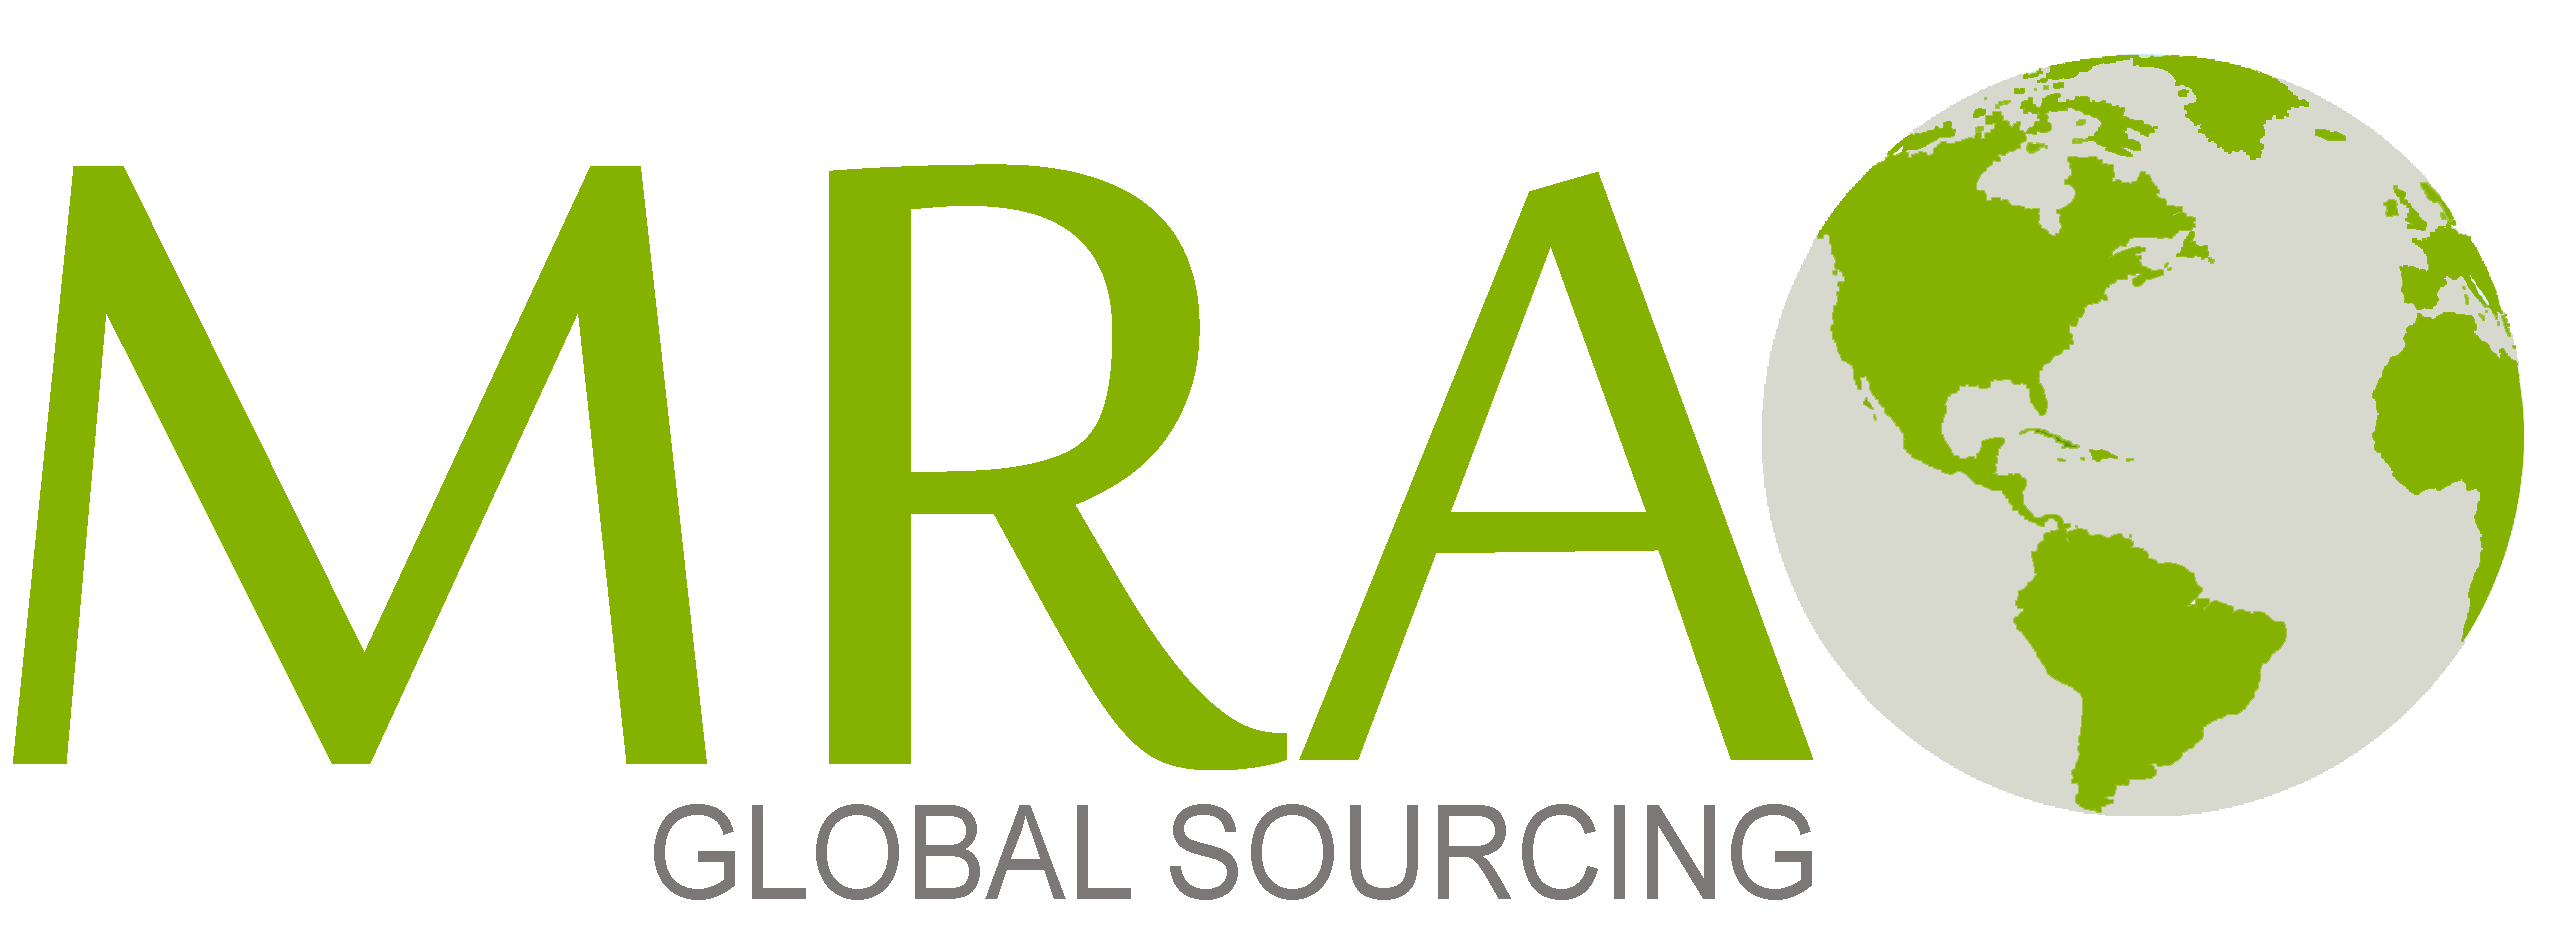 MRA Global Sourcing – Client Logos